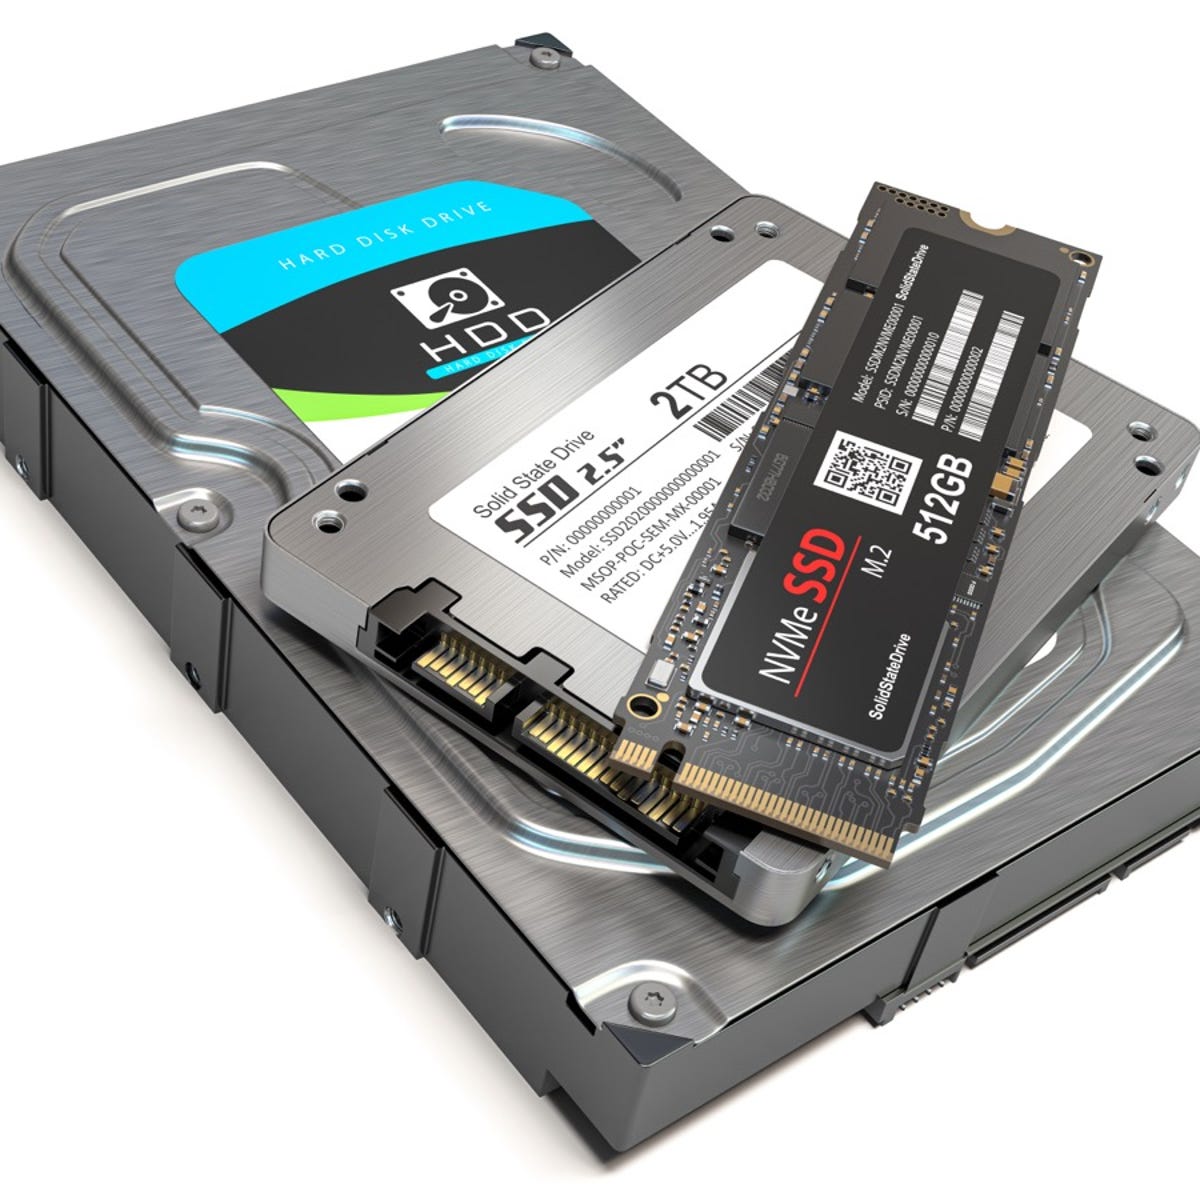 Tidsserier system pustes op SSD vs HDD: What's the difference, and which should you buy? | ZDNET